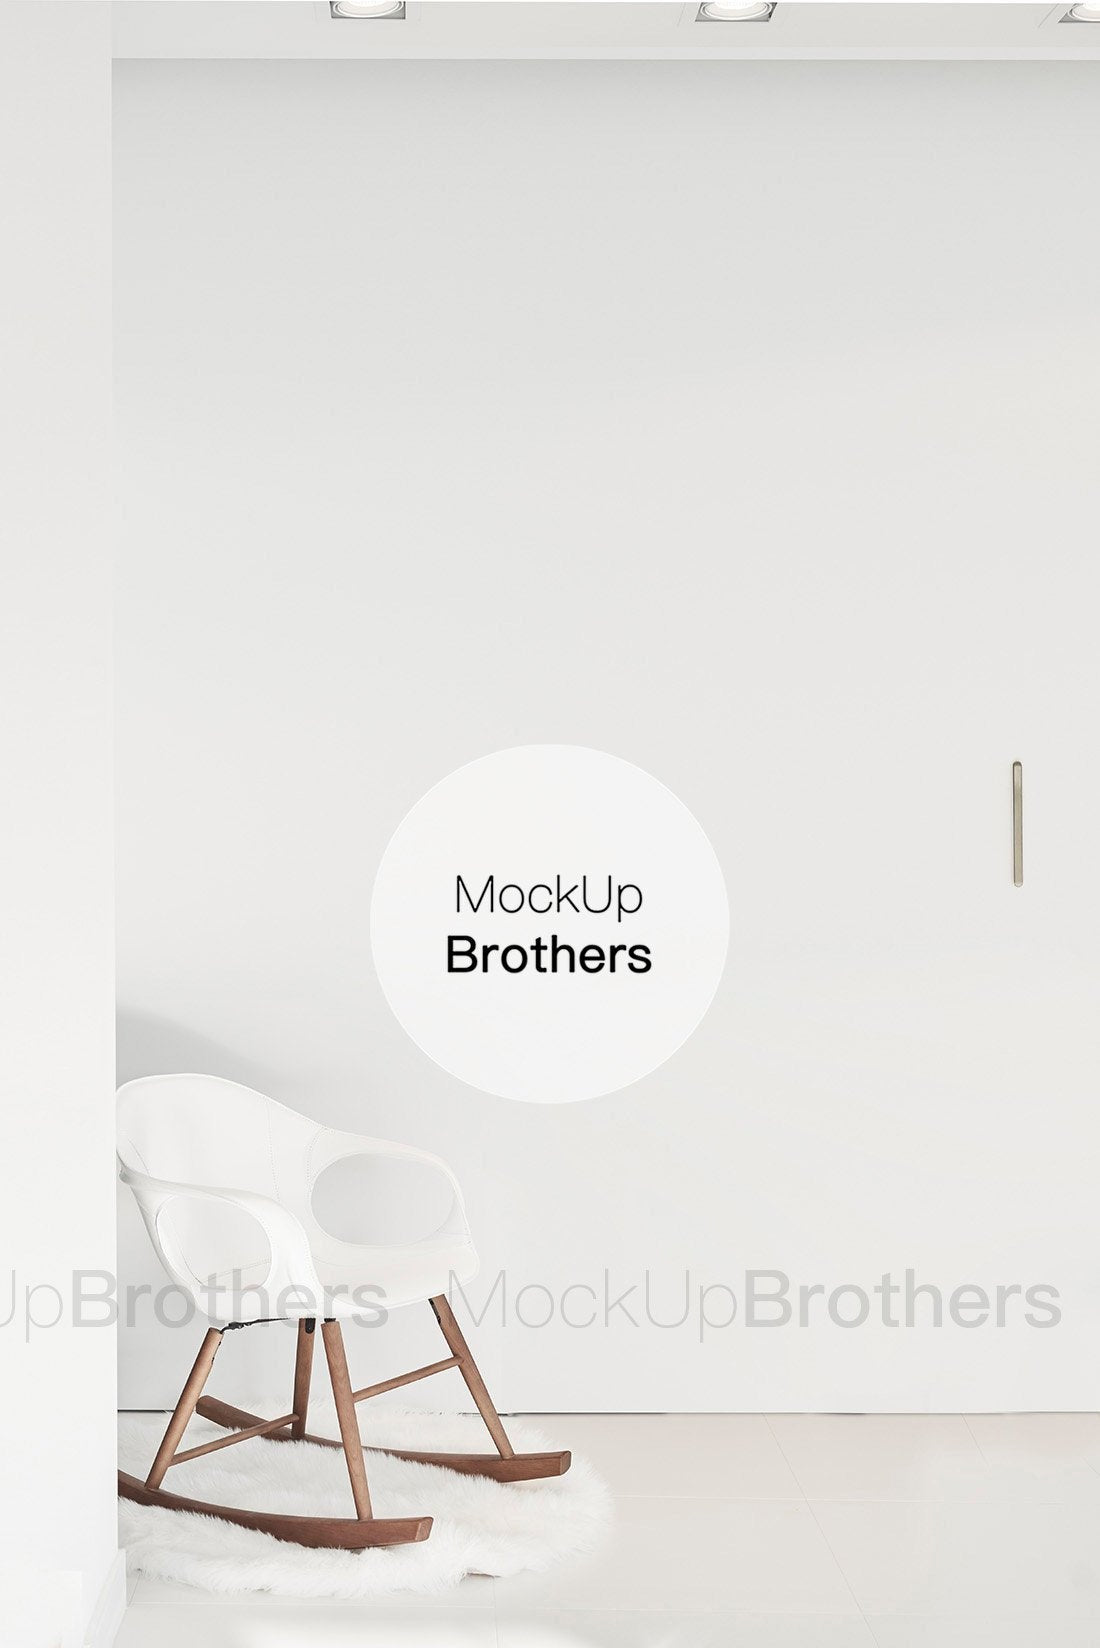 White interior mockup by Mockup Brothers